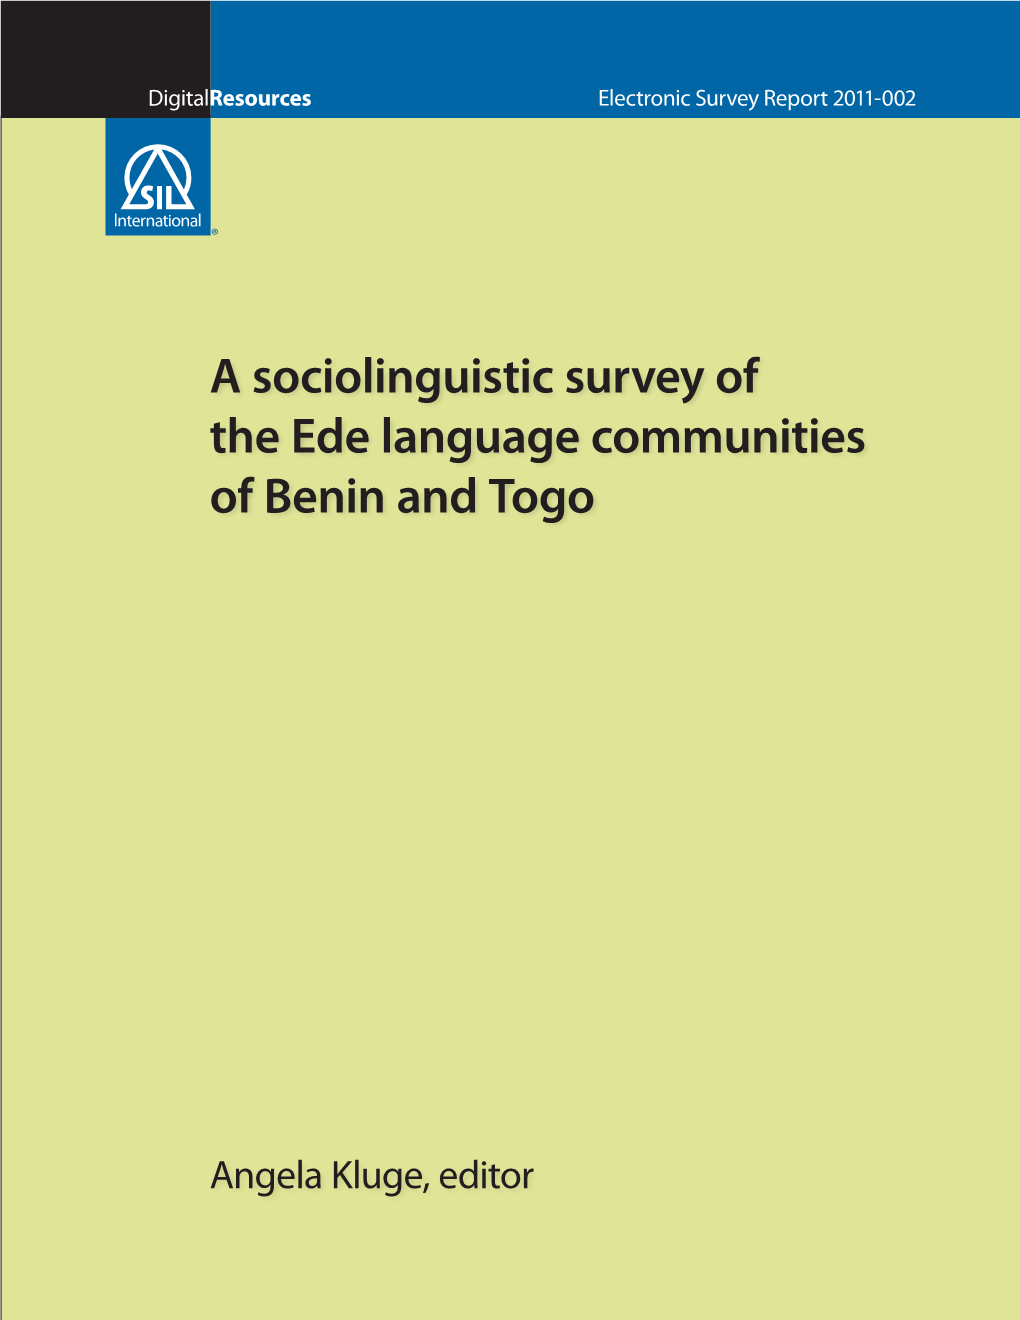 A Sociolinguistic Survey of the Ede Language Communities of Benin and Togo